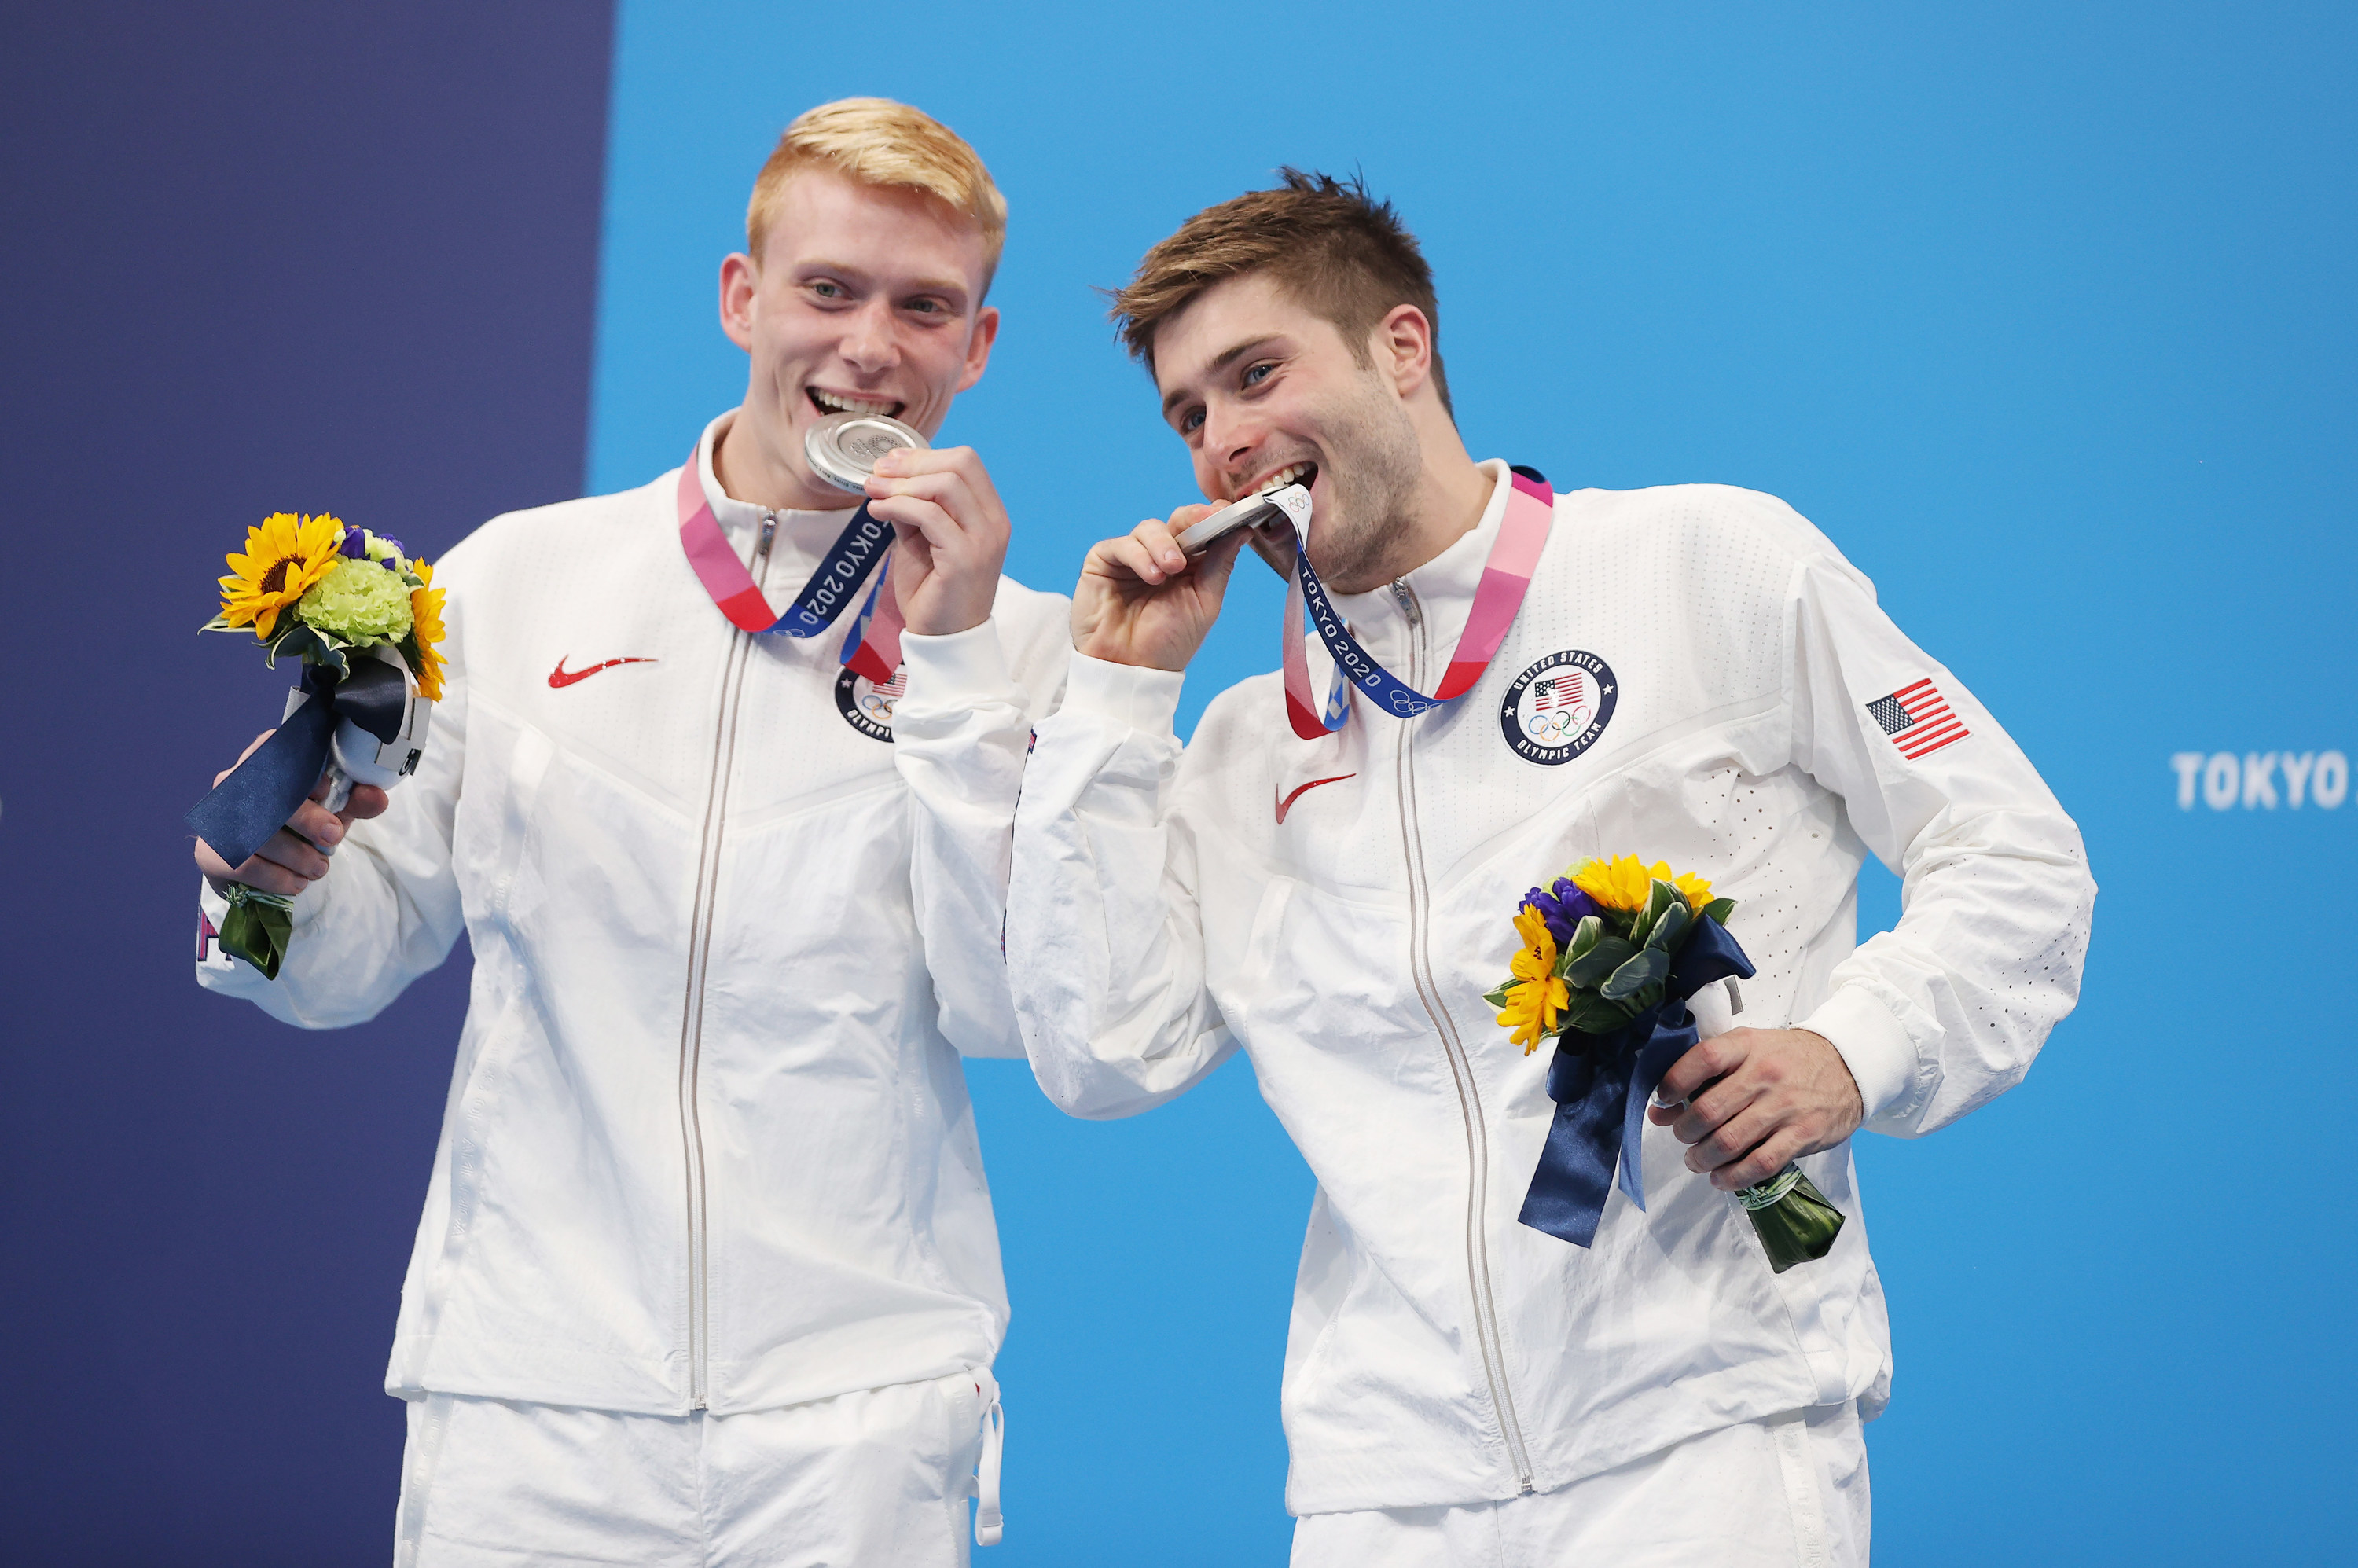 Andrew Capobianco and his diving partner pose biting their medals after win...